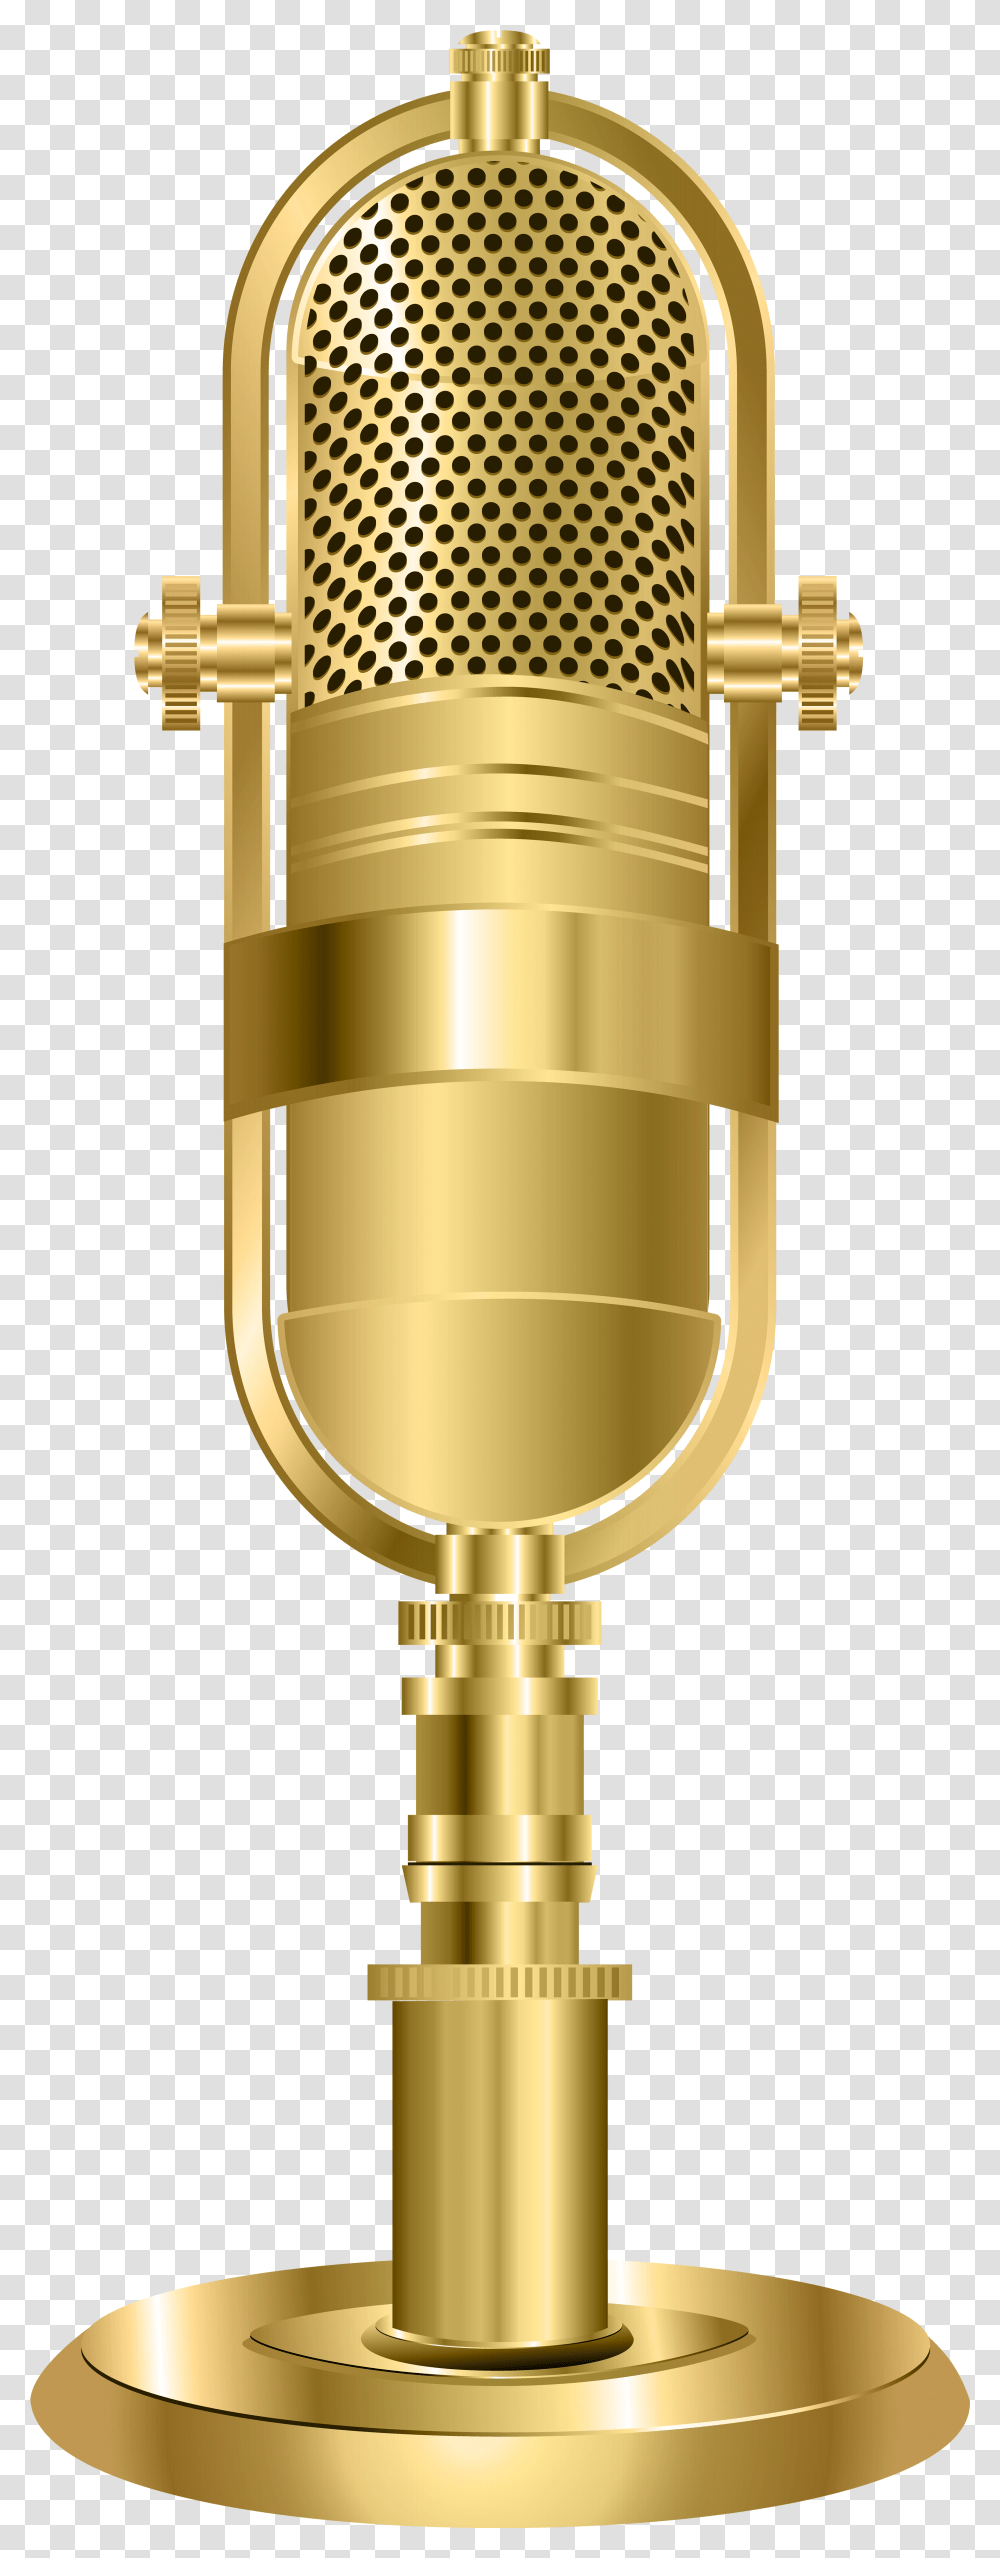 Microphone Clipart Recording Studio Mic Background Gold Microphone, Lamp, Weapon, Weaponry, Ammunition Transparent Png